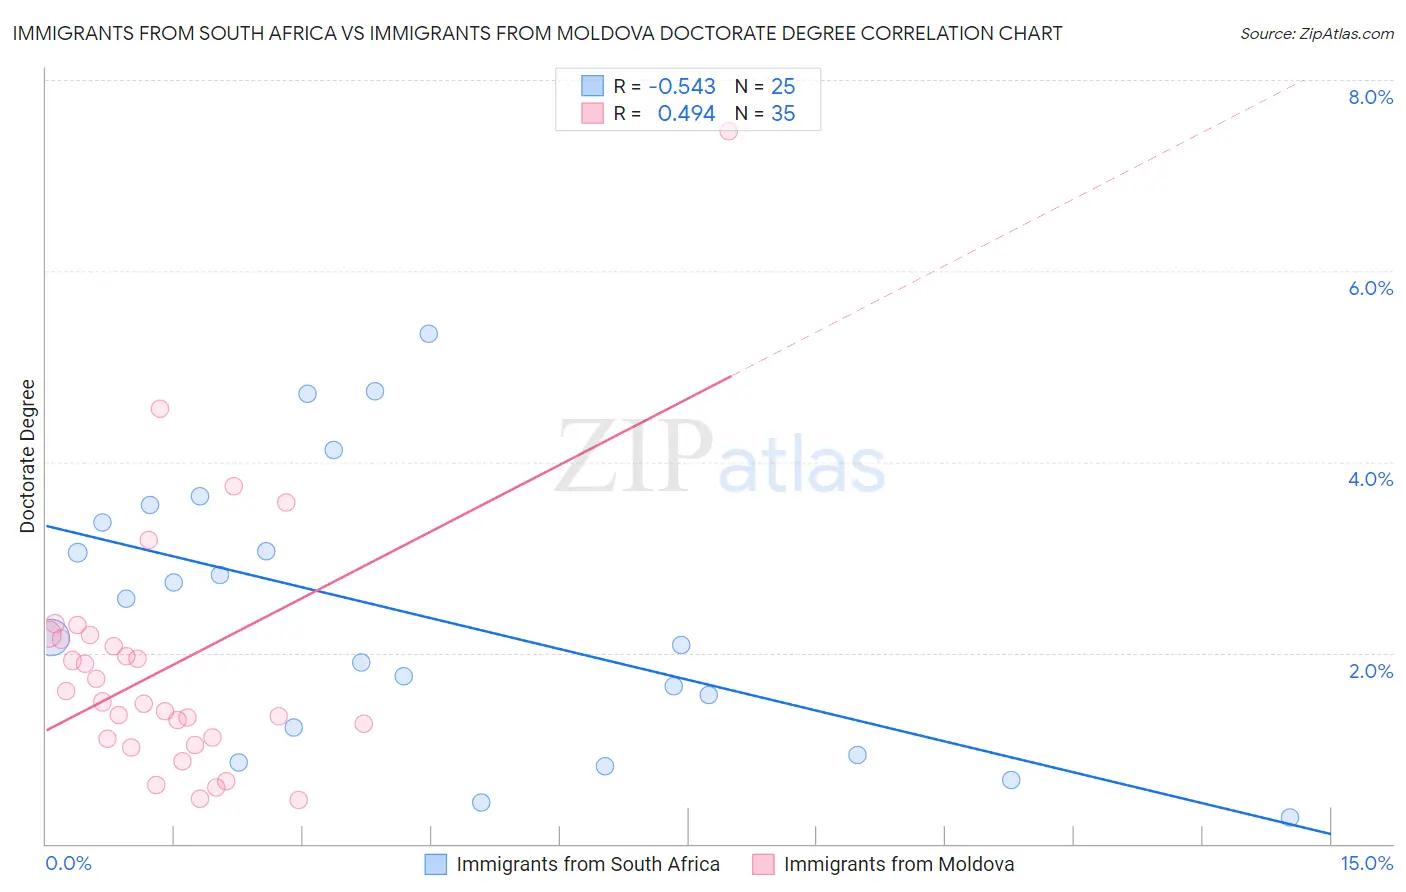 Immigrants from South Africa vs Immigrants from Moldova Doctorate Degree